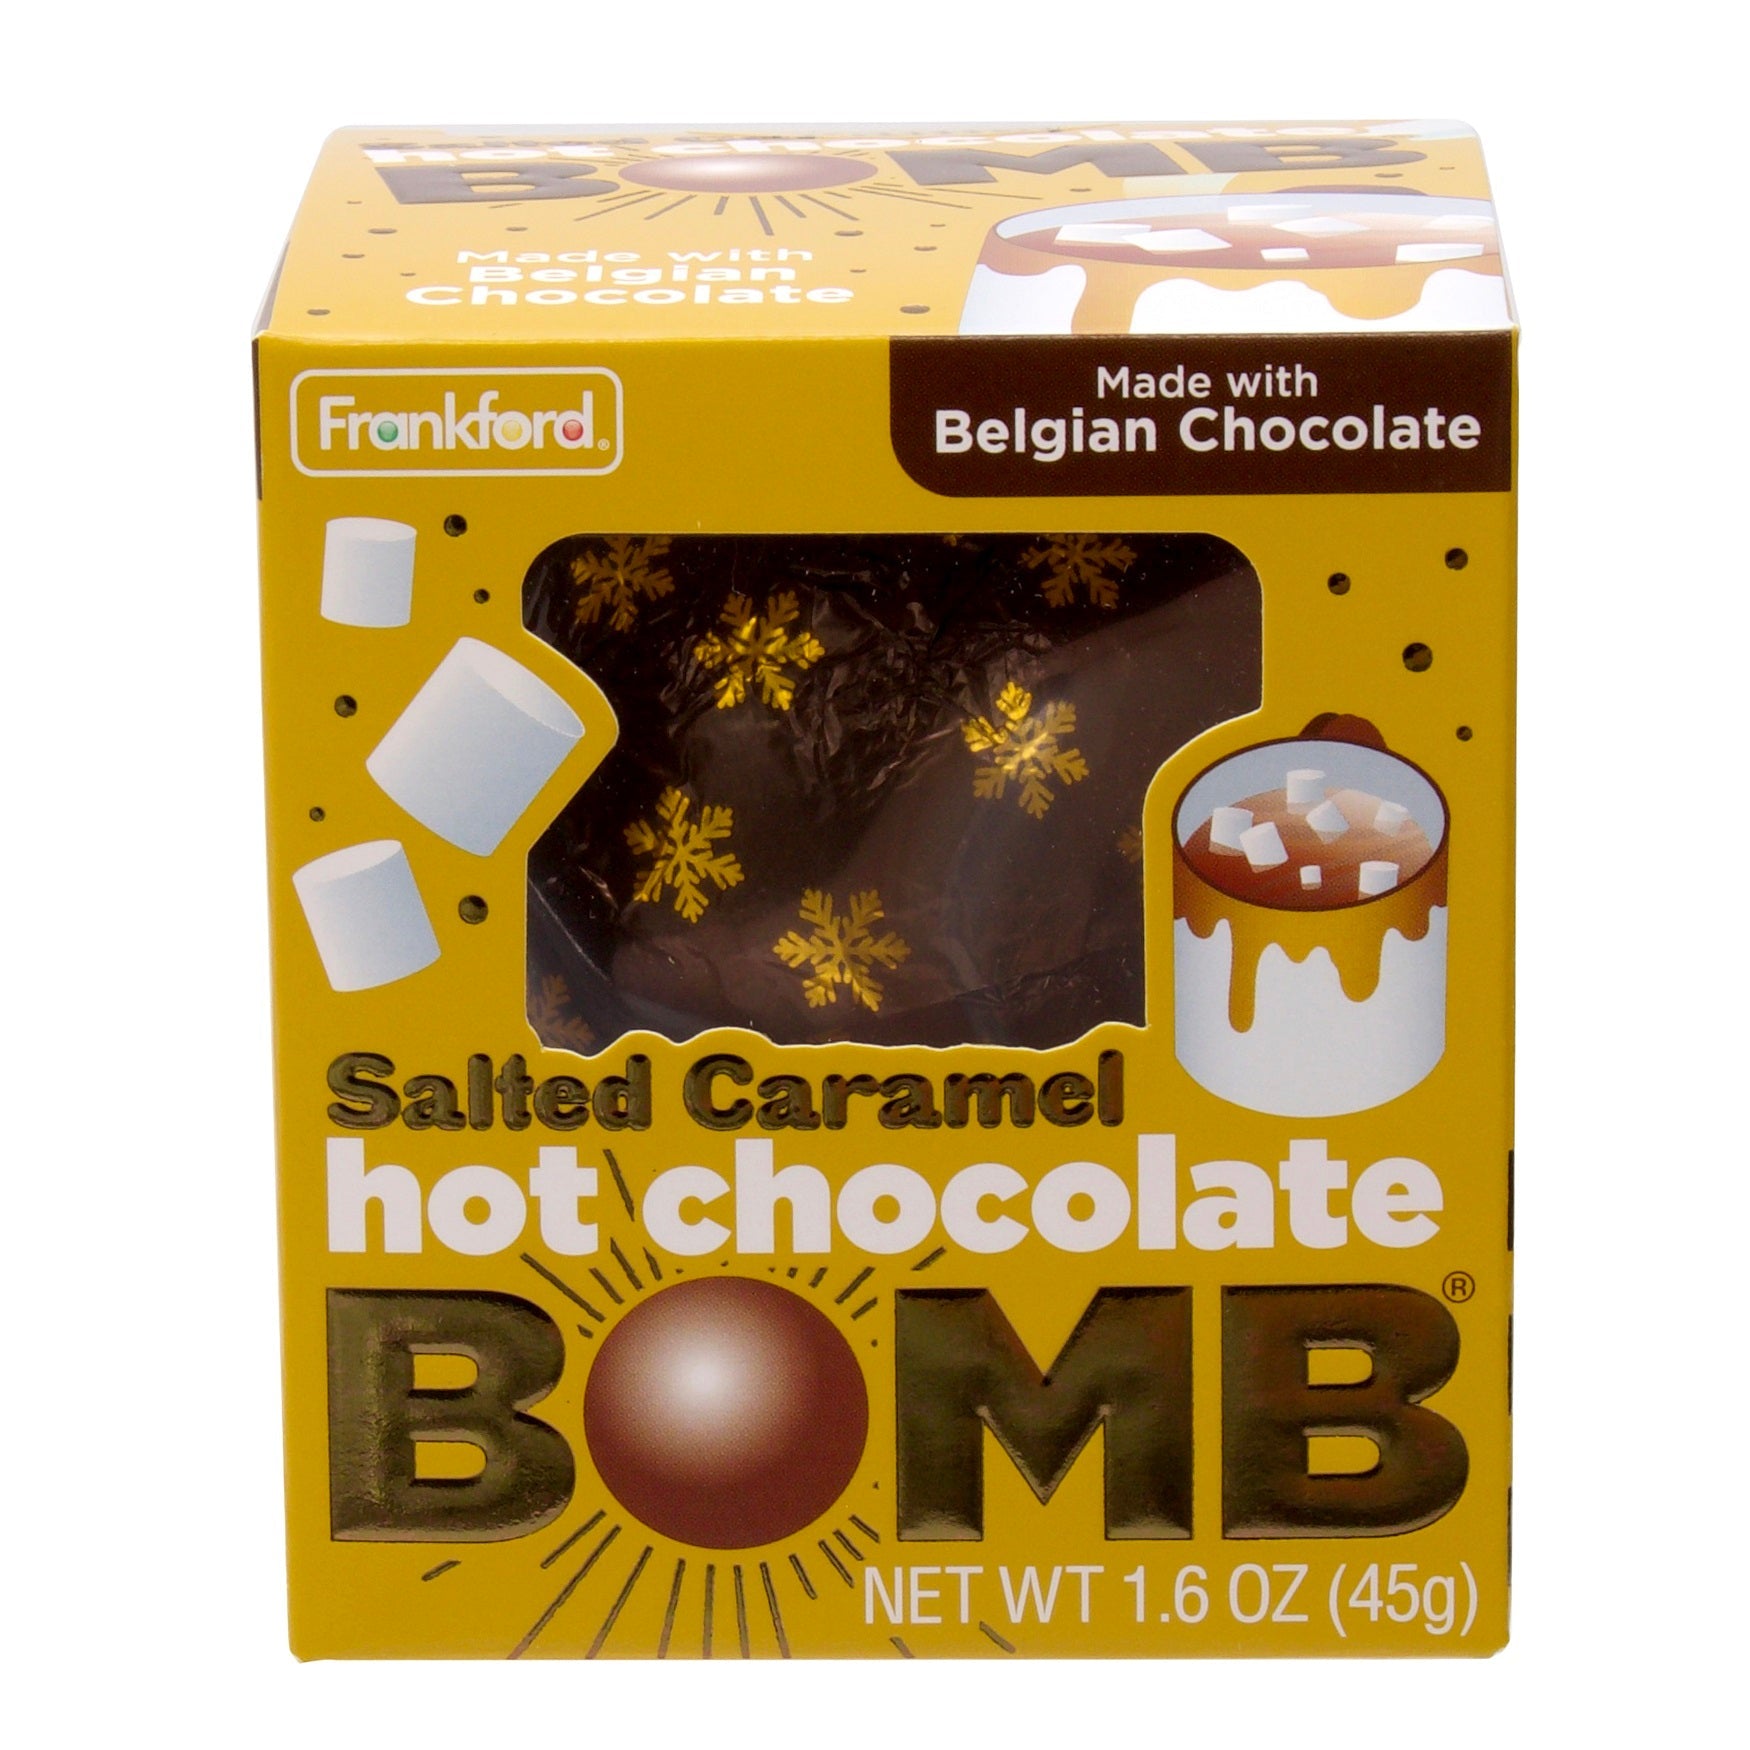 yellow box with brown and snowflake print foil wrapped hot chocolate bomb